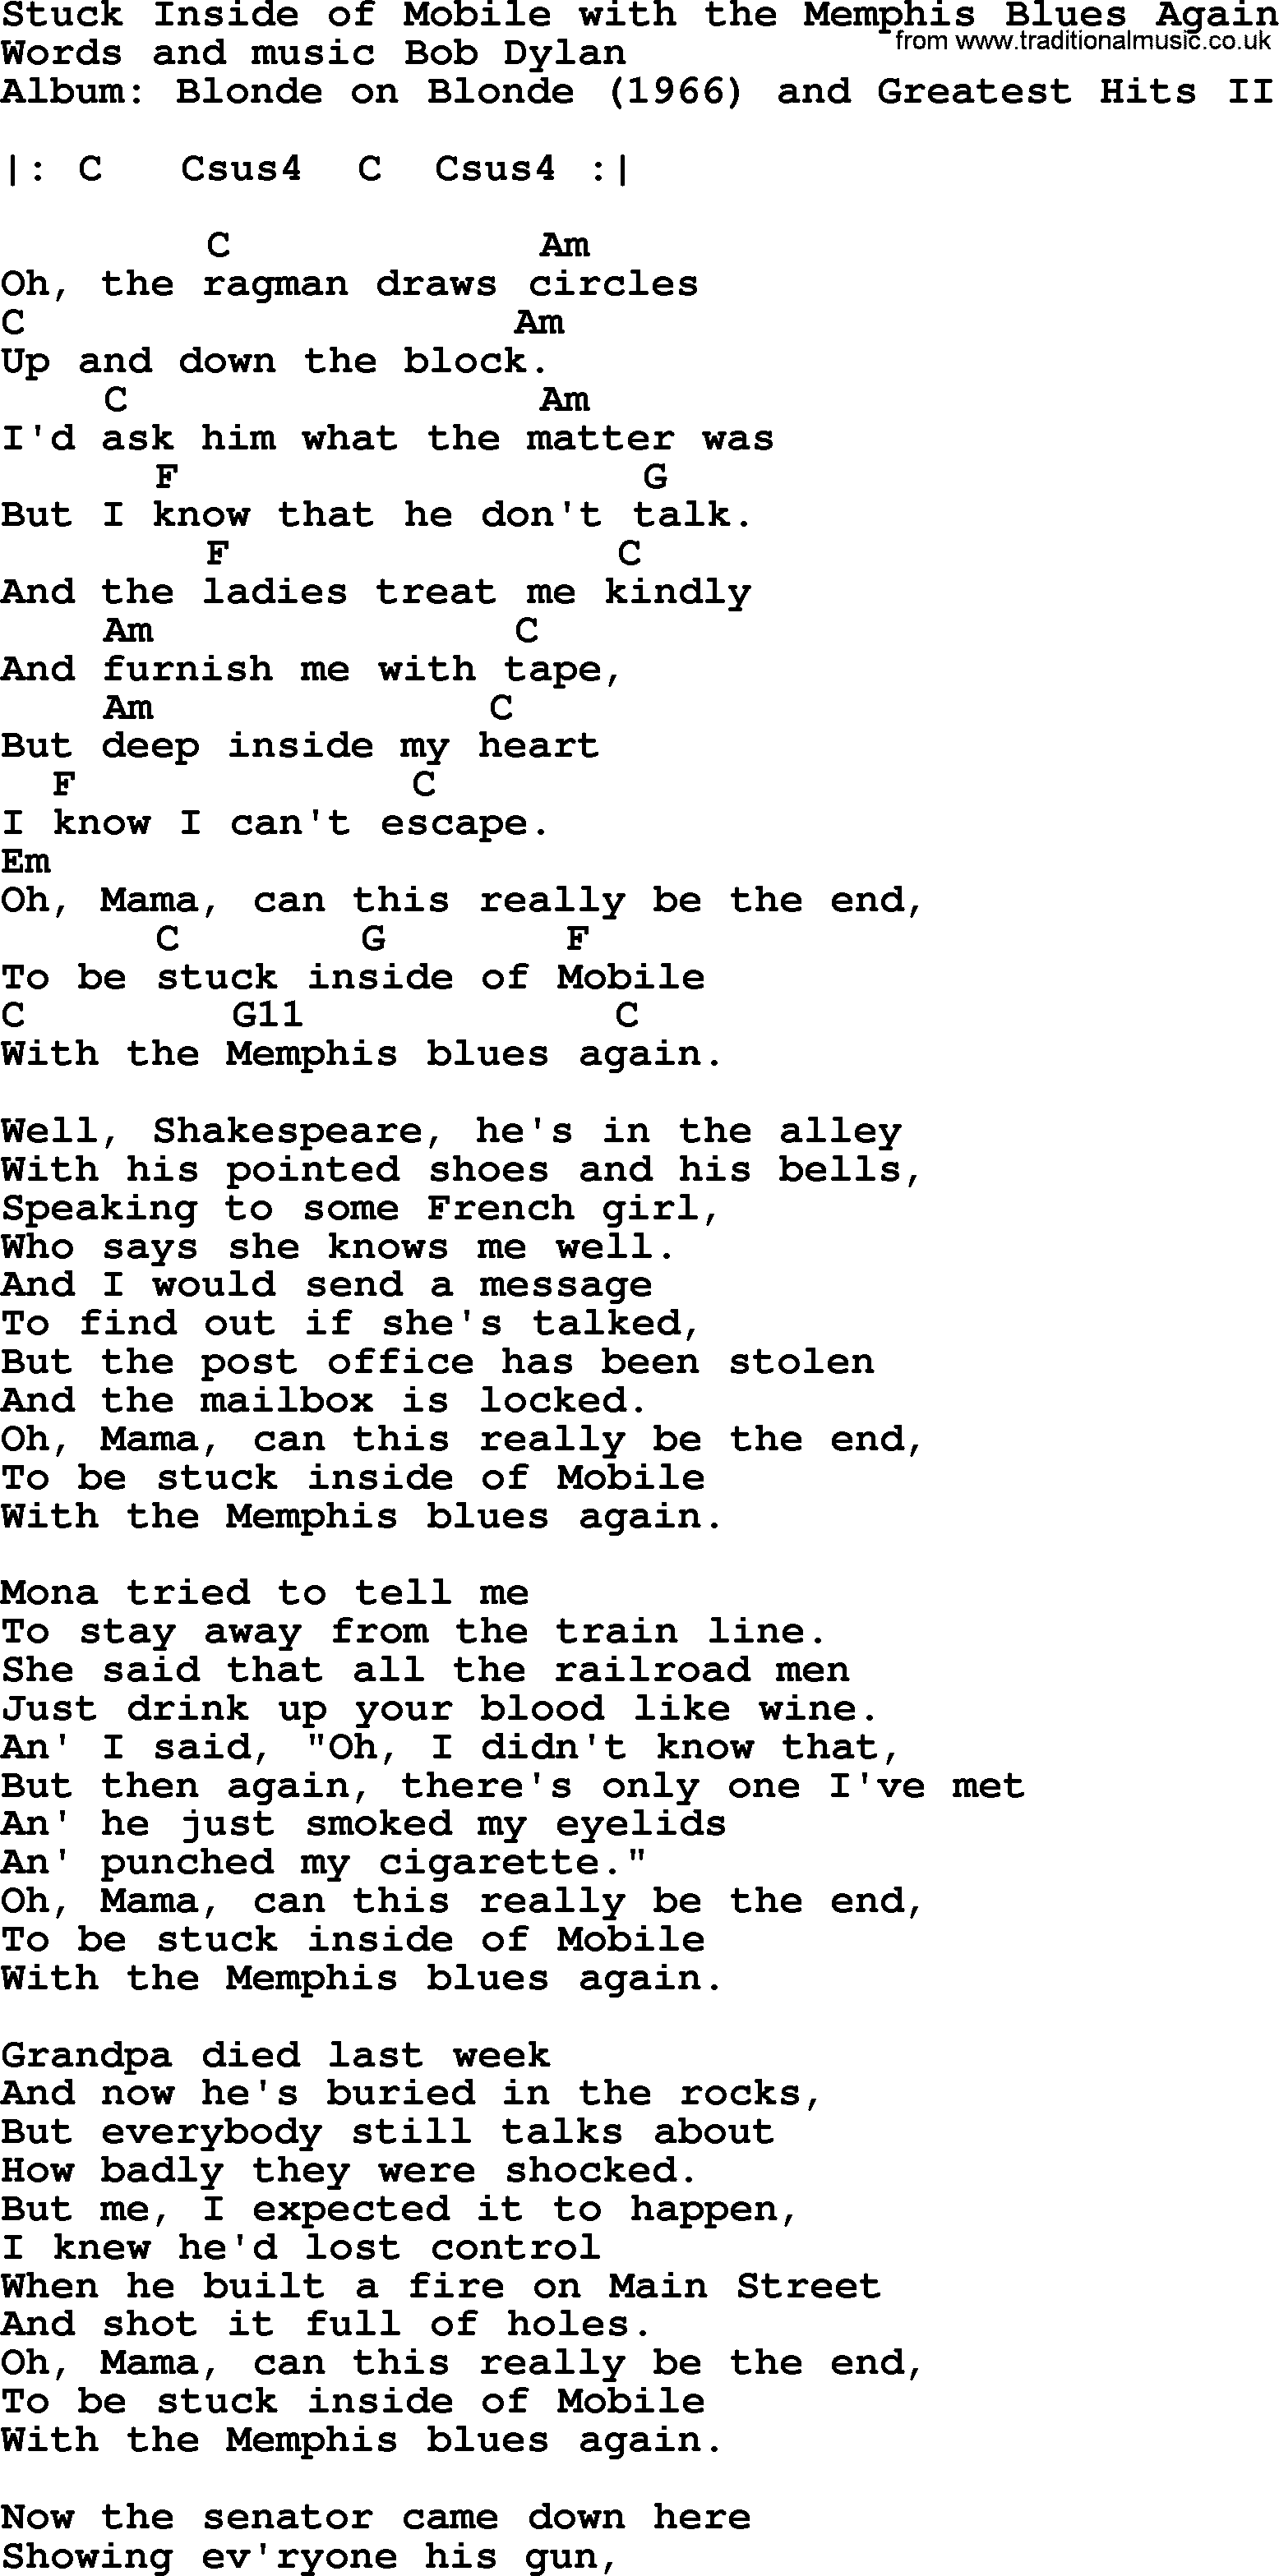 Bob Dylan song, lyrics with chords - Stuck Inside of Mobile with the Memphis Blues Again